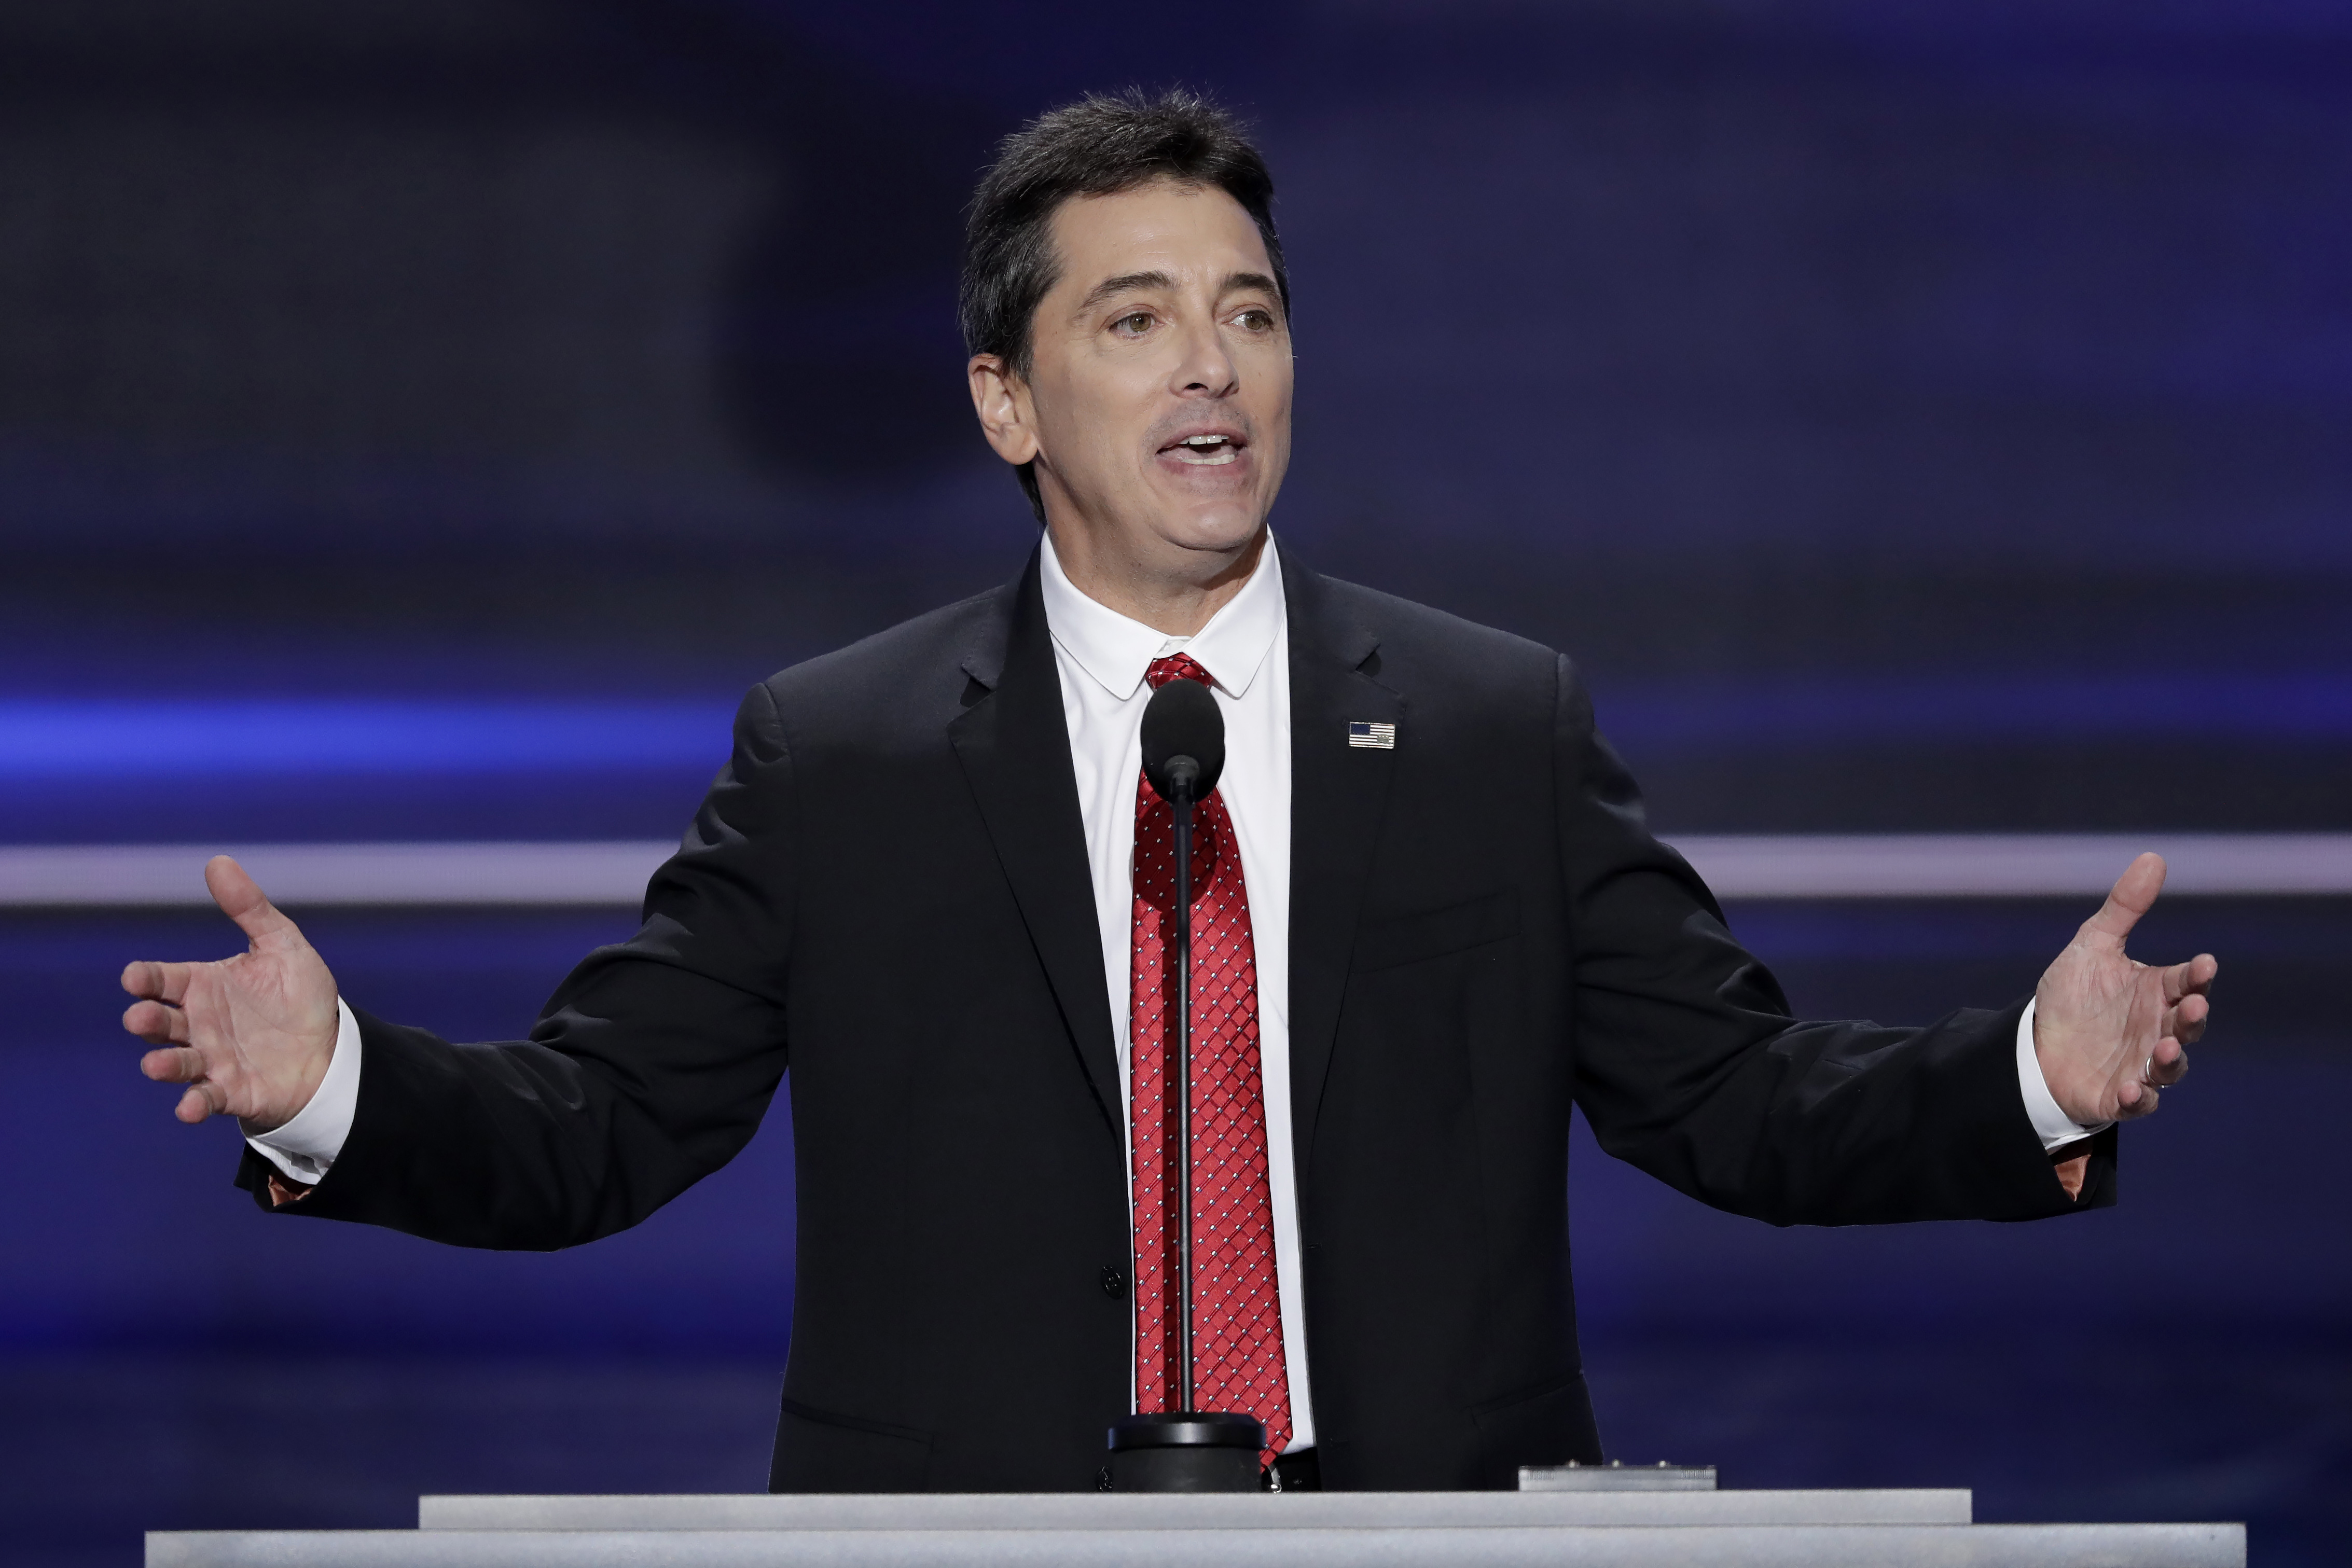 Scott Baio speaks at the Republican National Convention in Cleveland on July 18, 2016 (J. Scott Applewhite—AP)